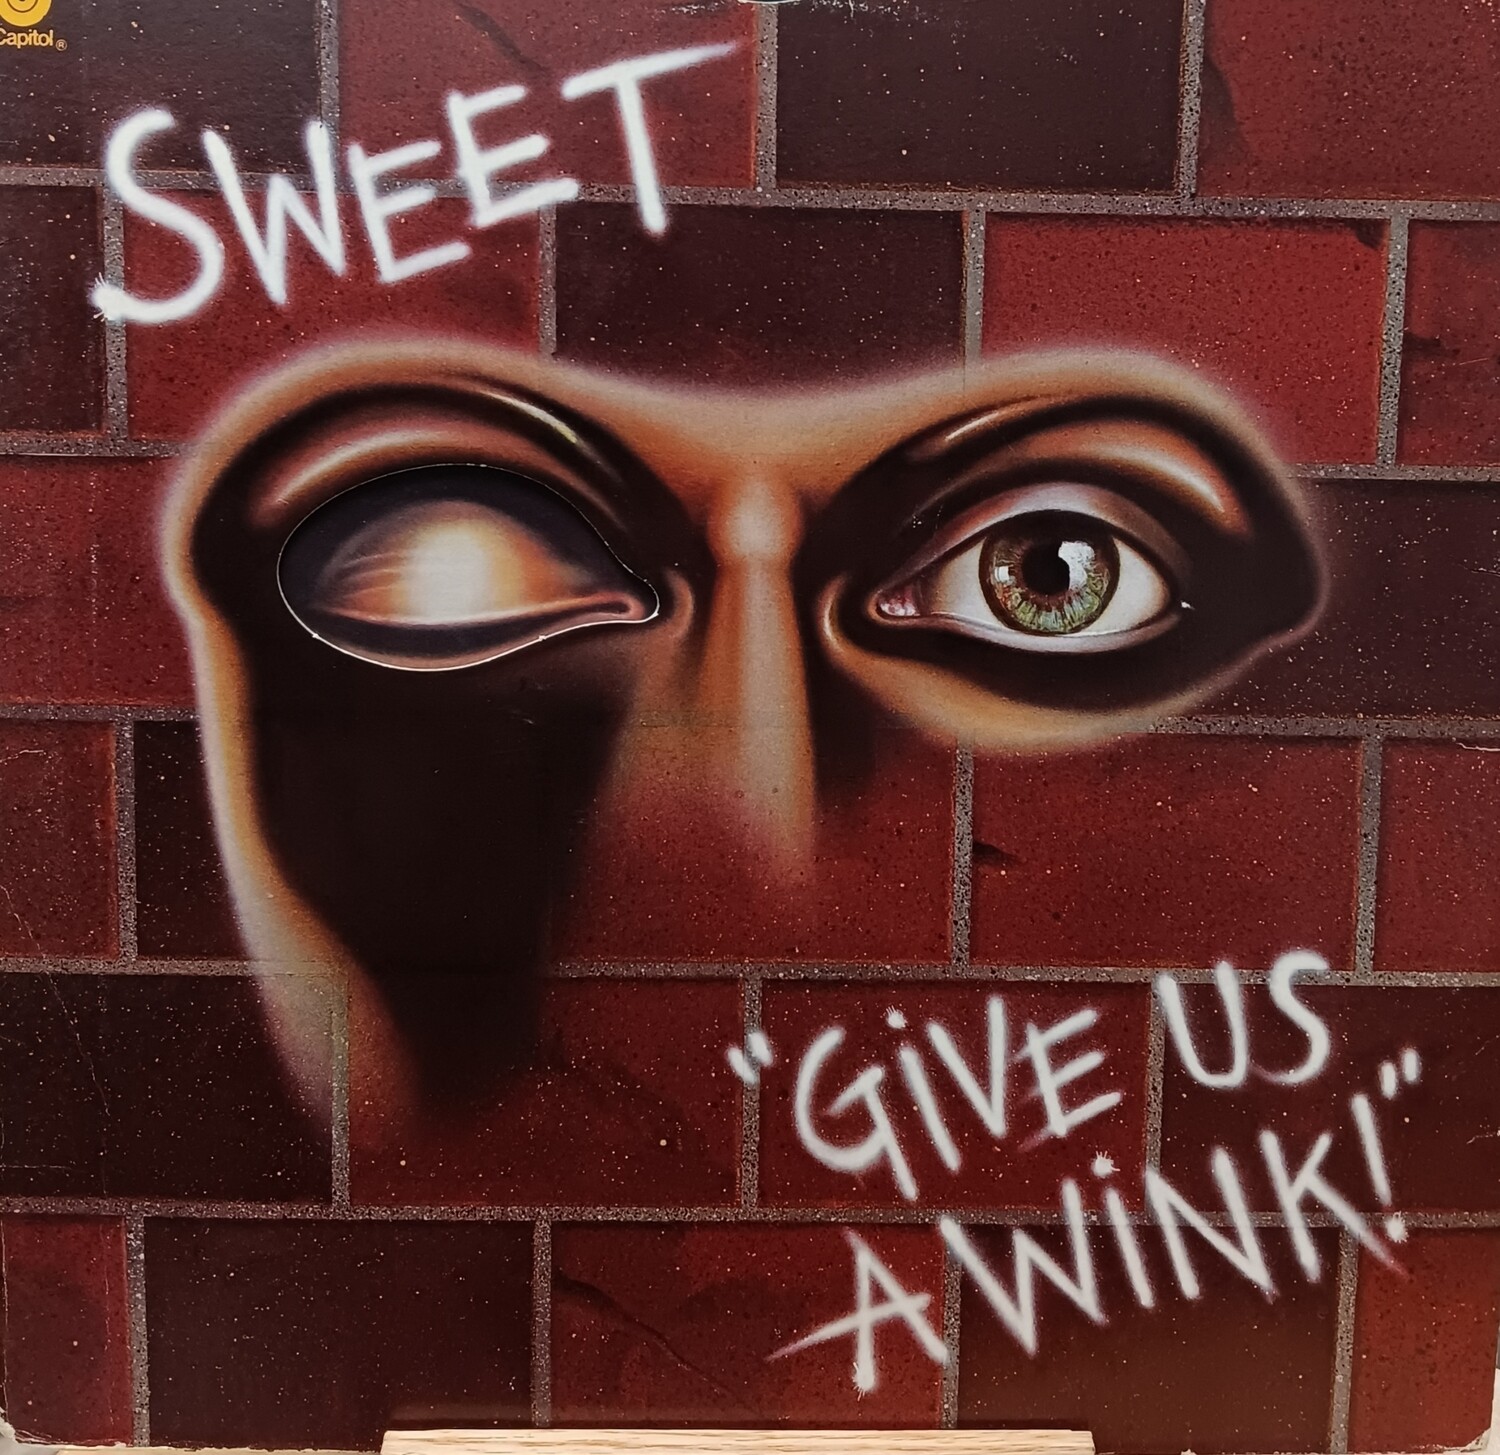 Sweet - Give Us a Wink